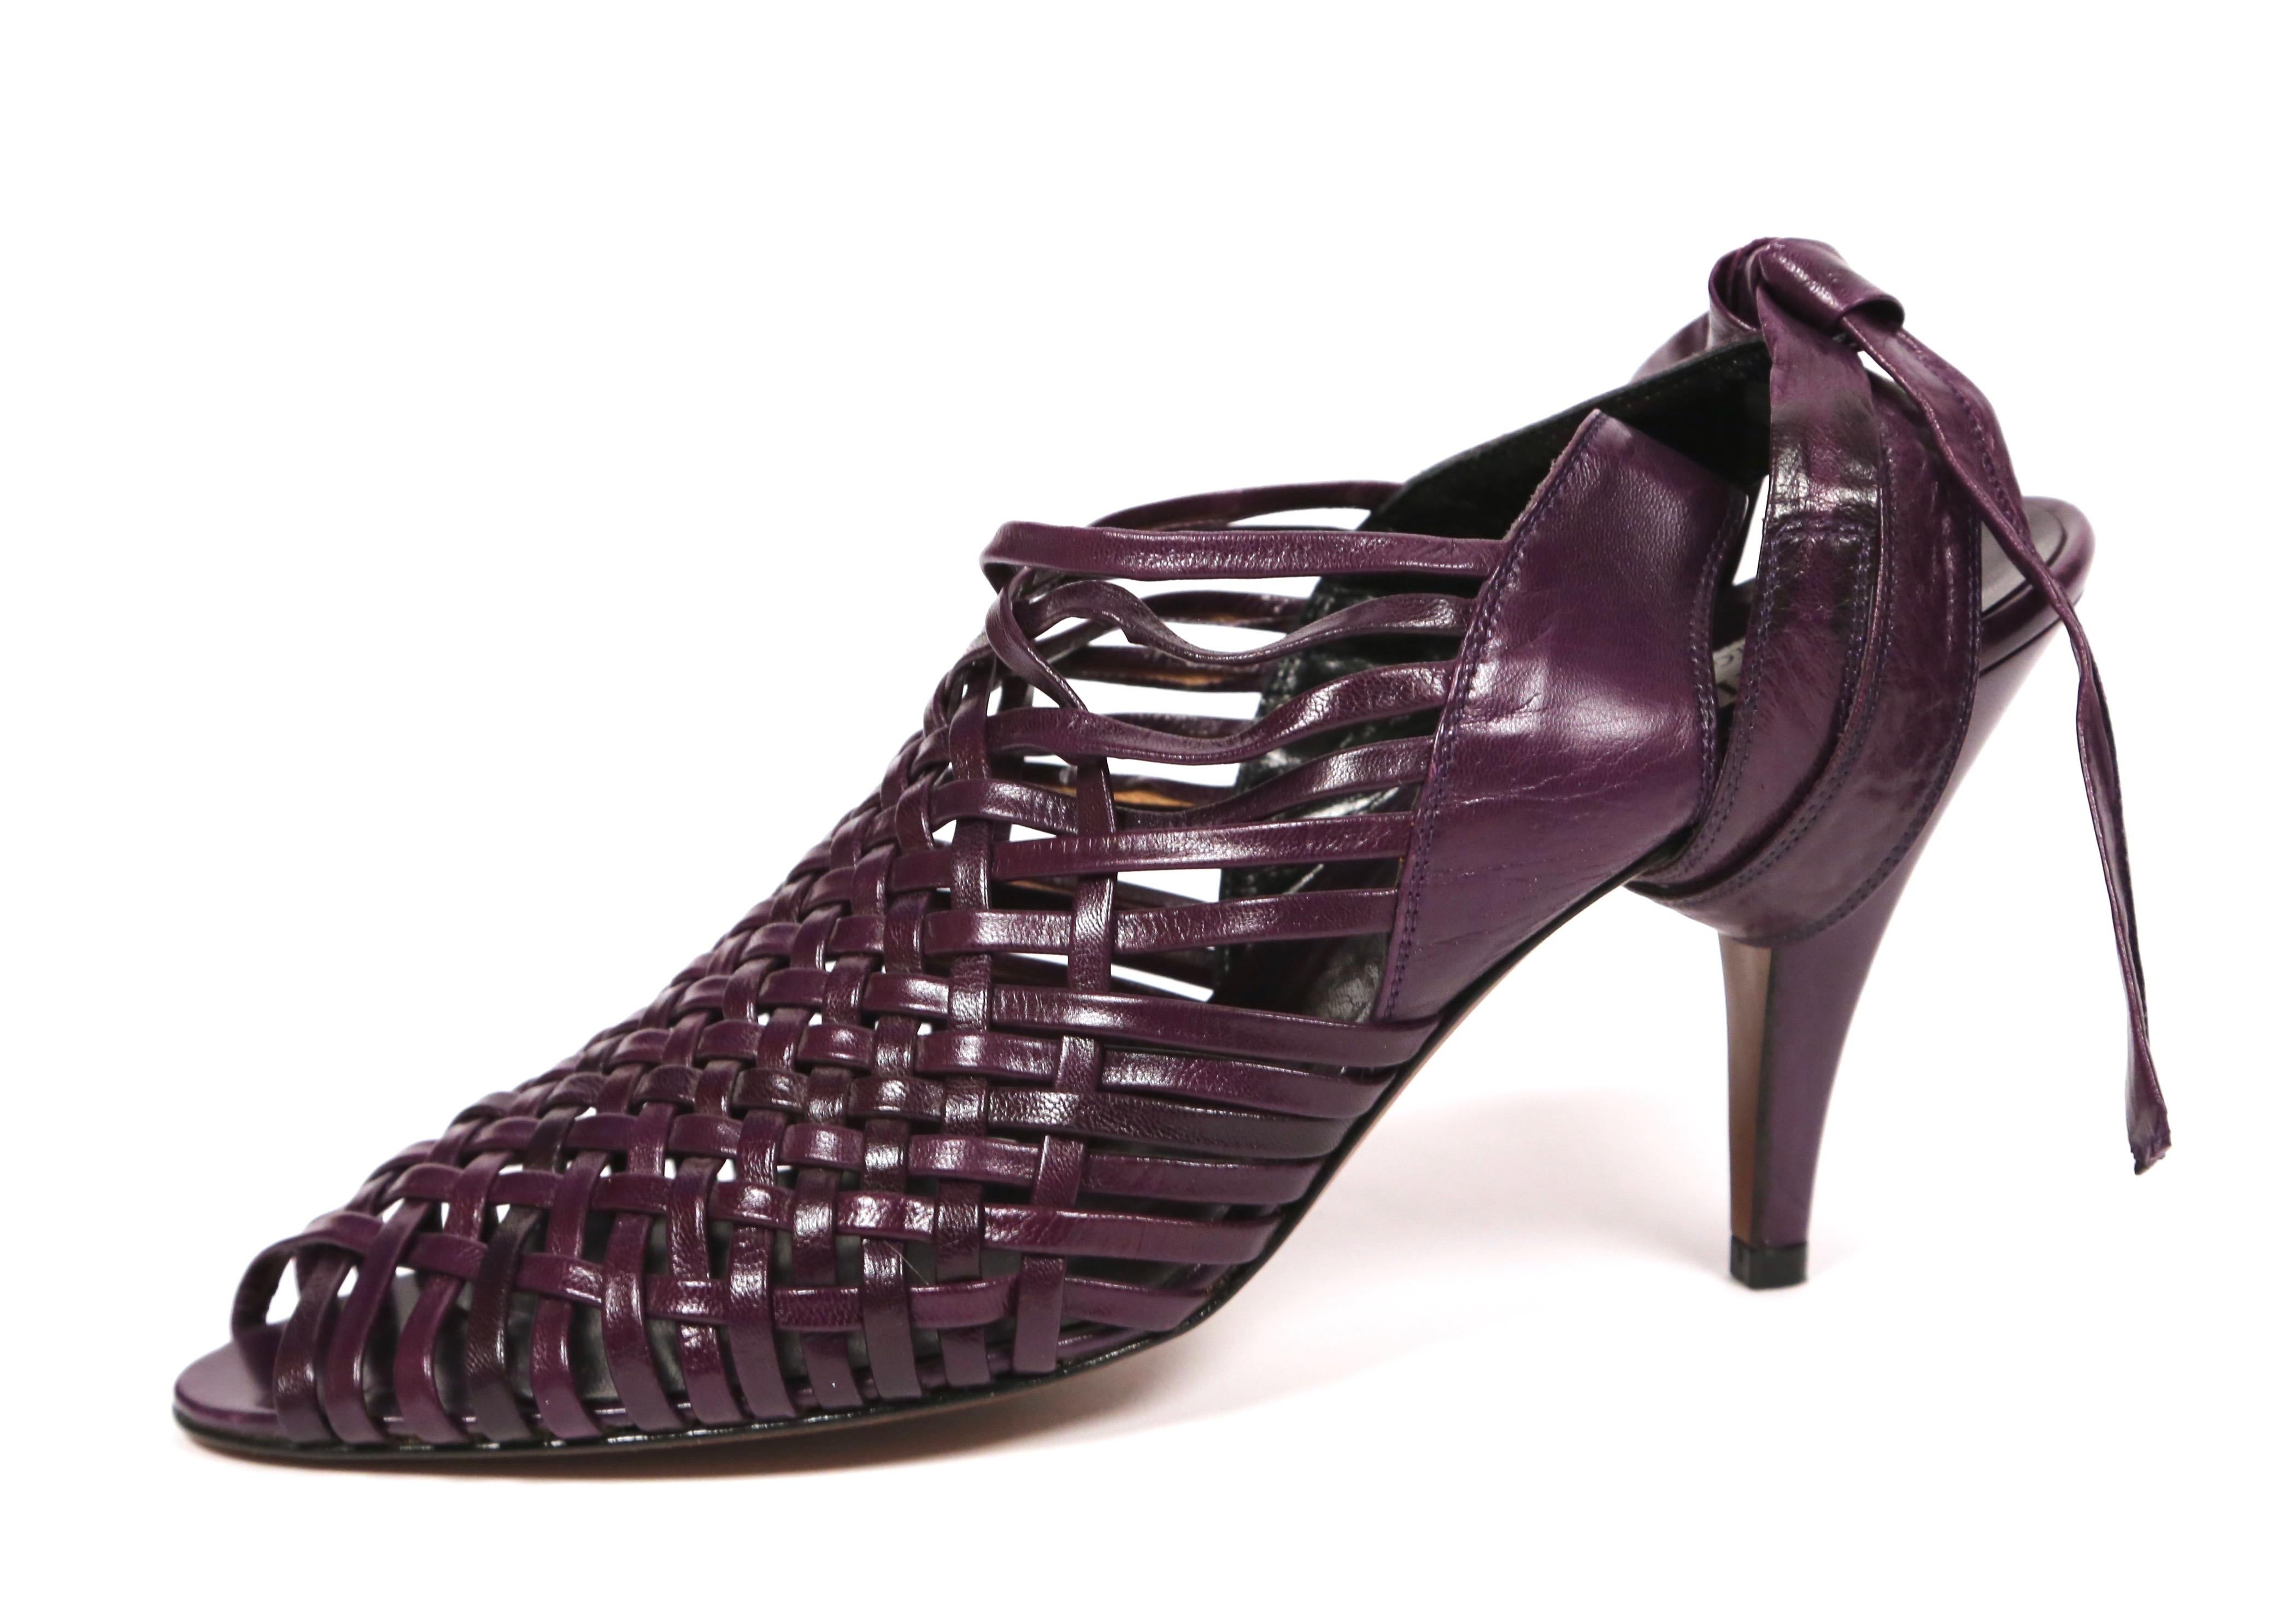 Purple, woven leather heels with ankle straps designed by Azzedine Alaia dating to the 1980's. French size 41. Insoles measure approximately: 10.75